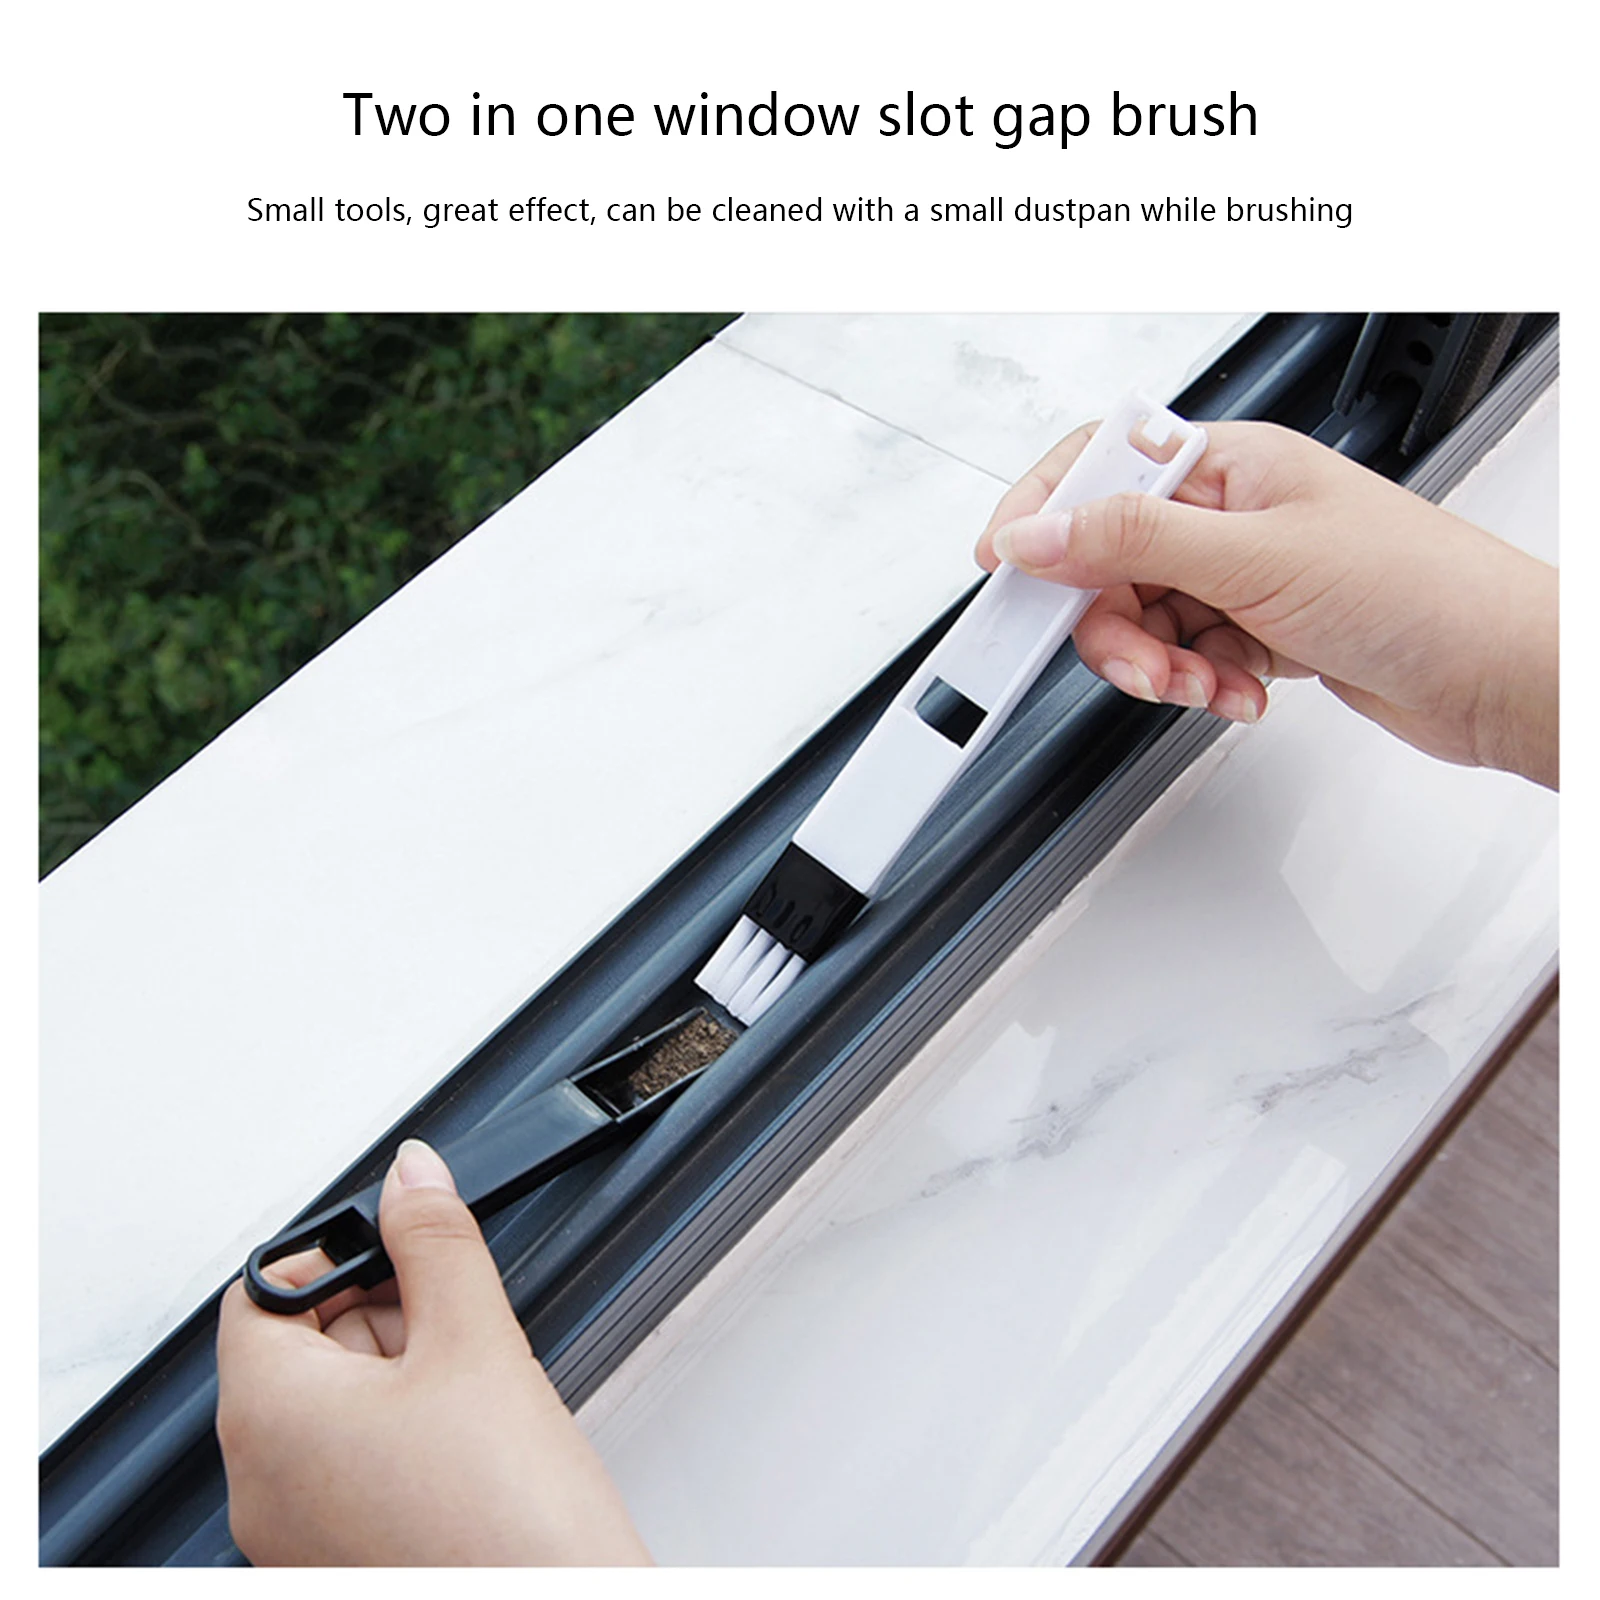 

2-In-1 Window Slot Brush Track Door Groove Corner Cleaning Brush with Detachable Dustpan for Keyboard Gap